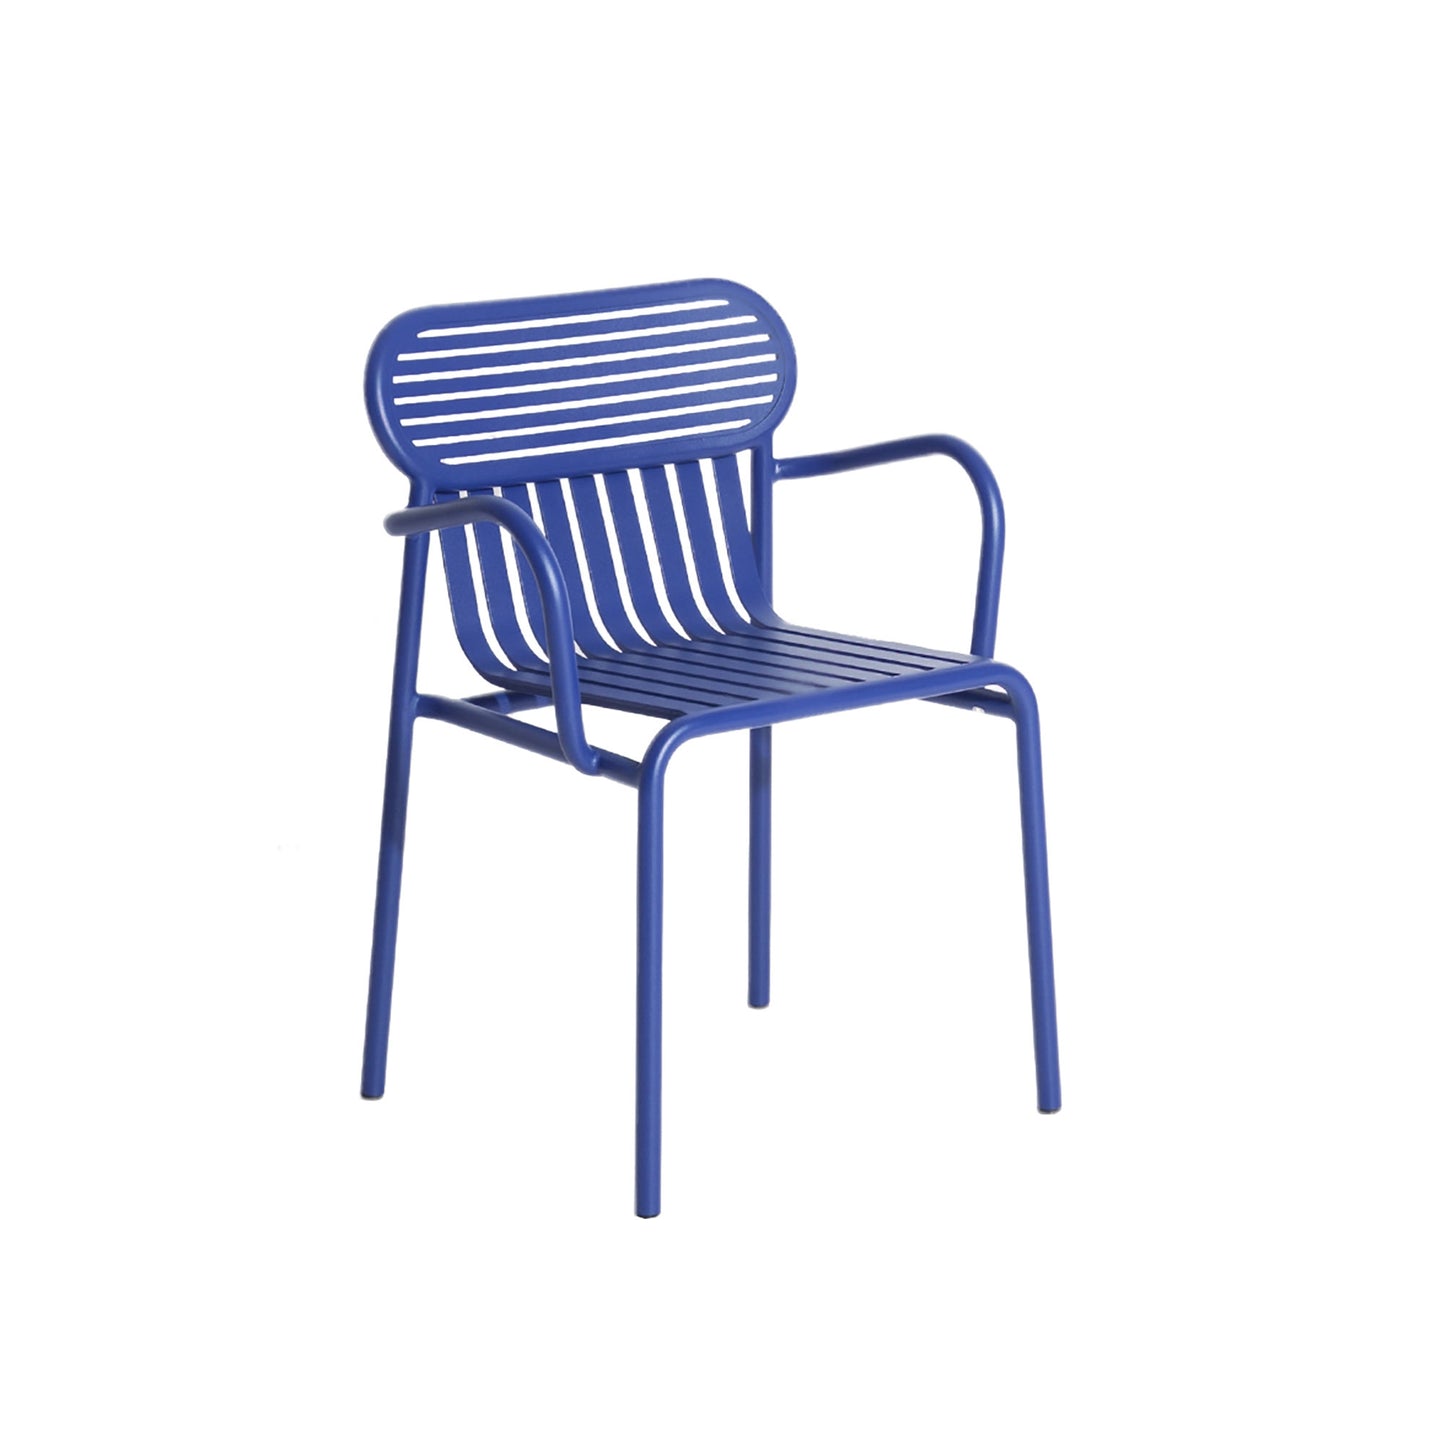 WEEK-END Dining Chair with Armrests by Petite Friture #Blue